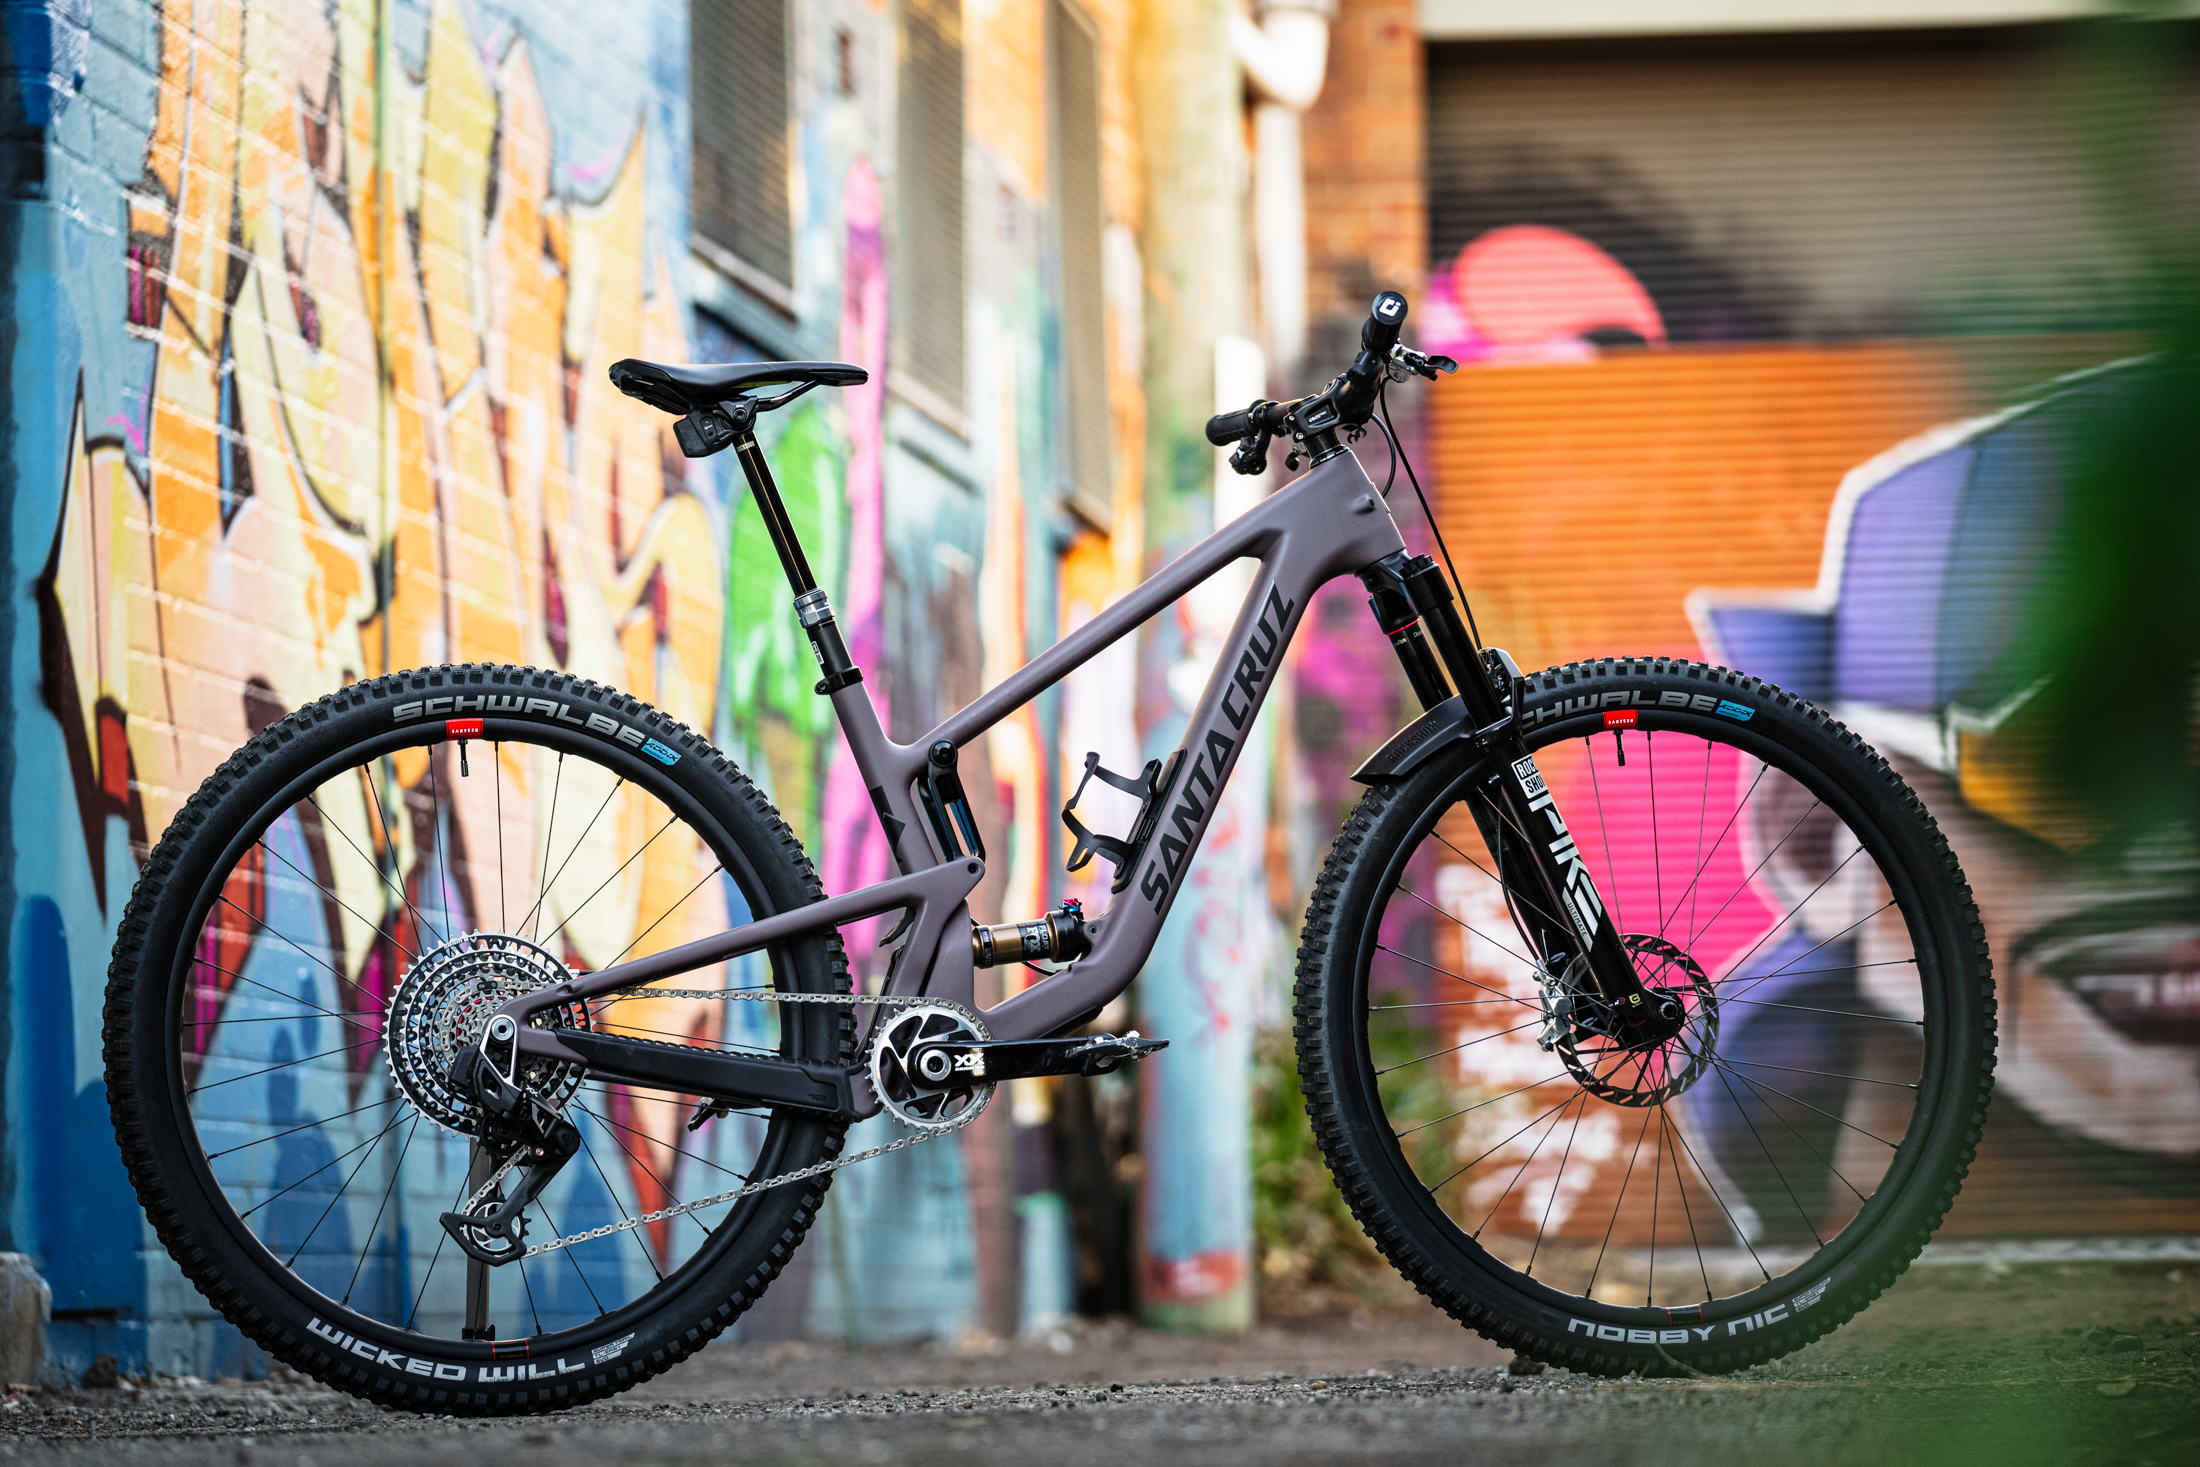 The Wicked Will and Nobby Nic combo not only complement this bike but add their own zing to a trail ride.